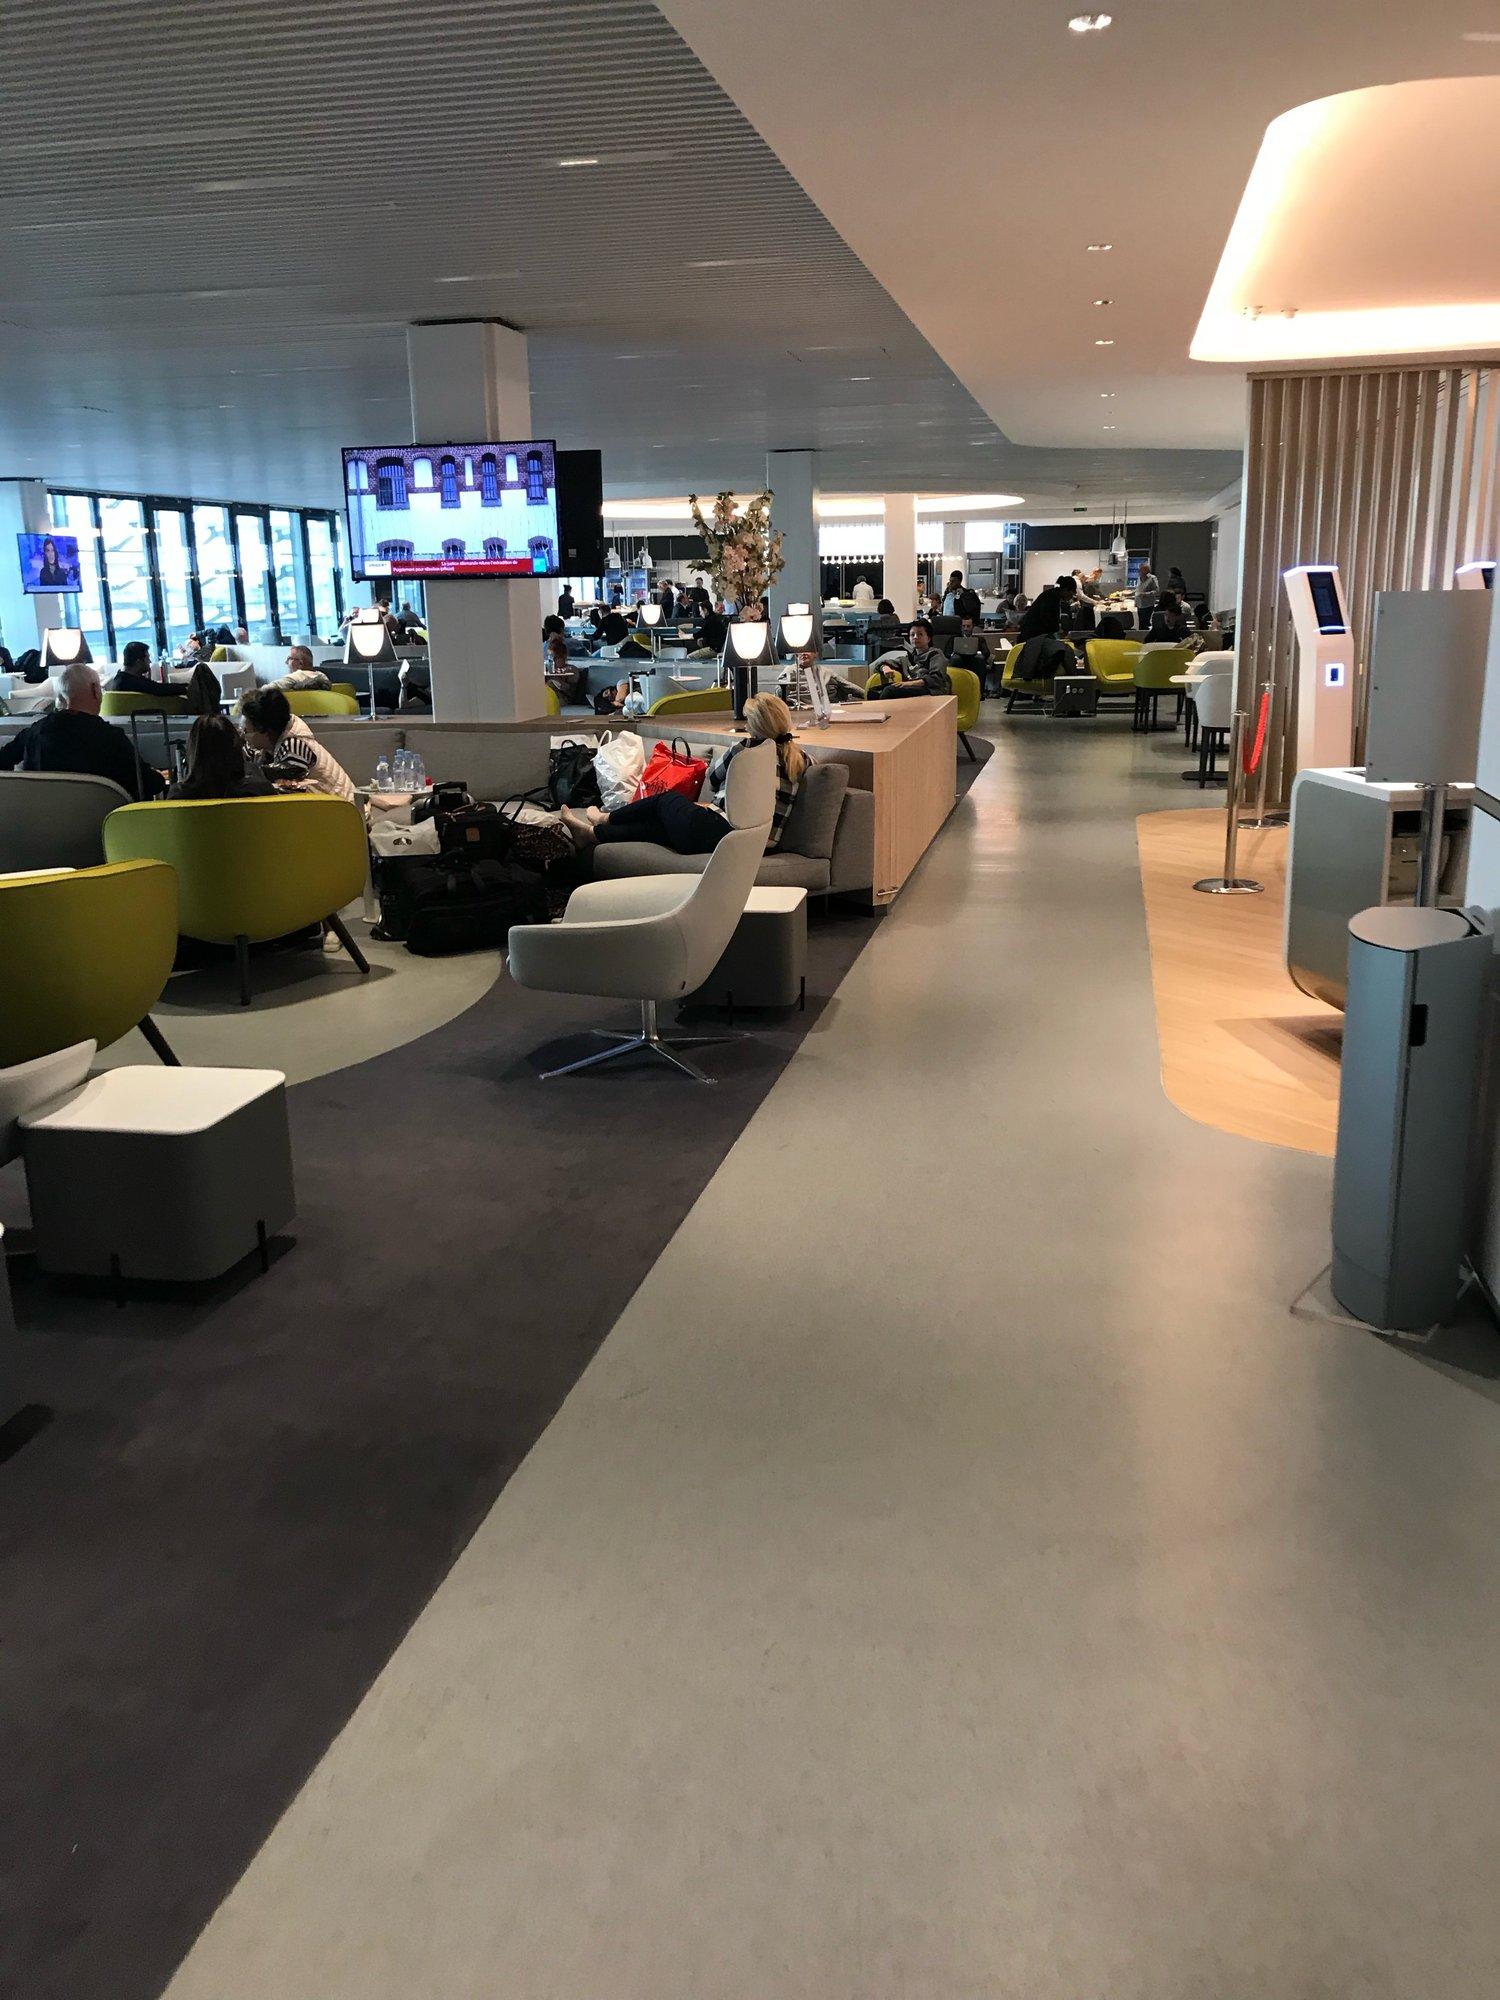 Air France Lounge (Concourse L) image 23 of 57